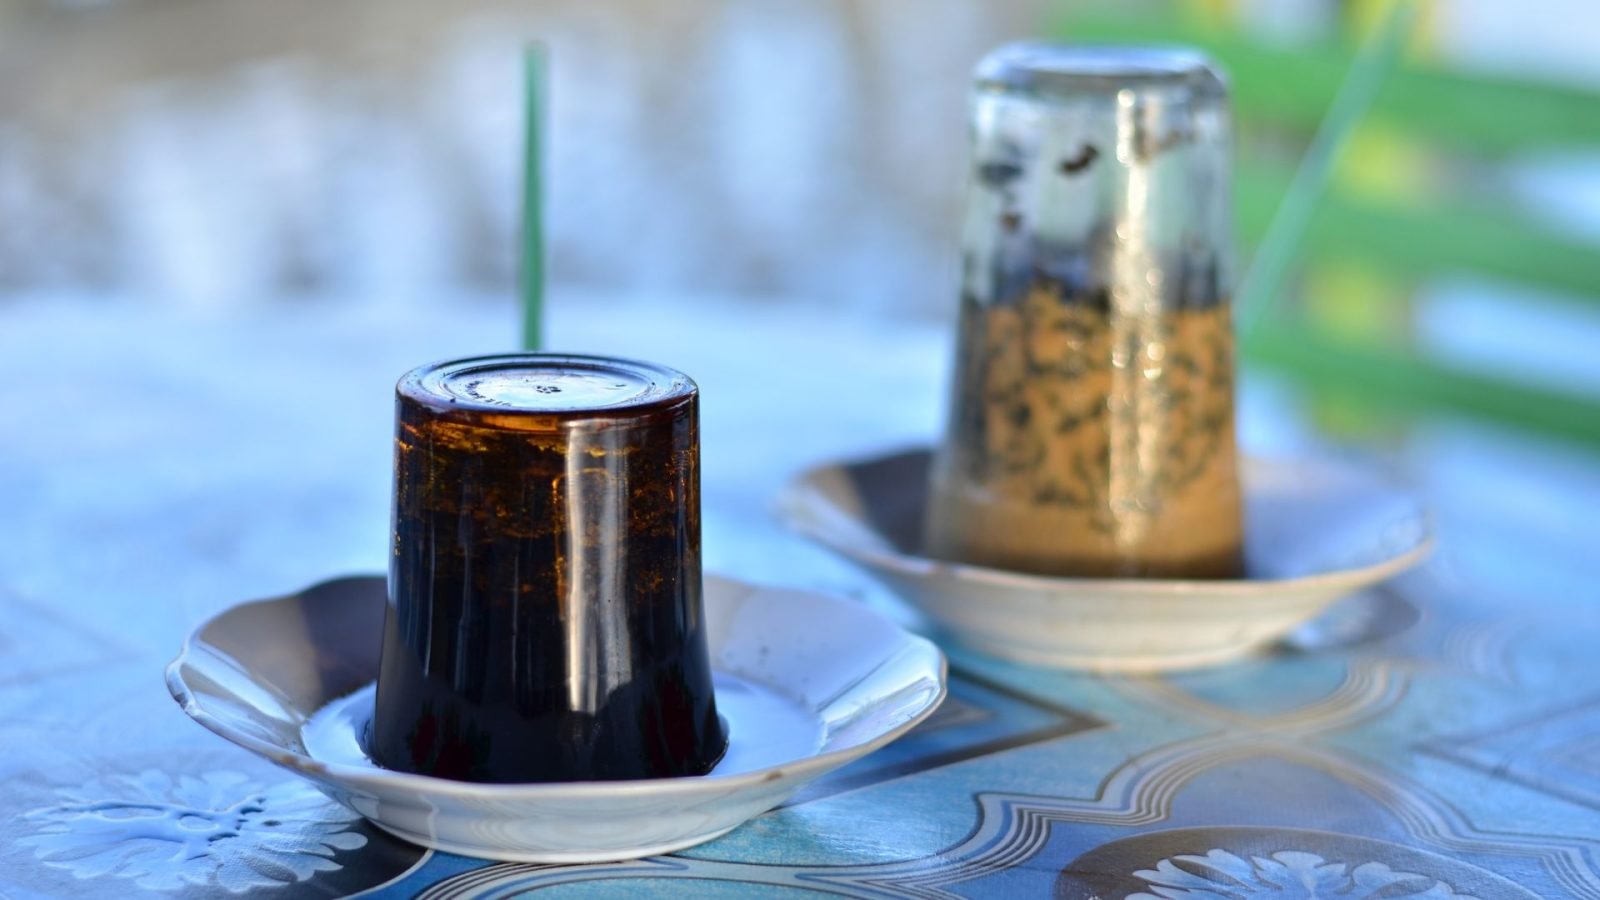 Kupi Khop Aceh, a Unique Way to Drink Coffee in an Upside-Down Glass